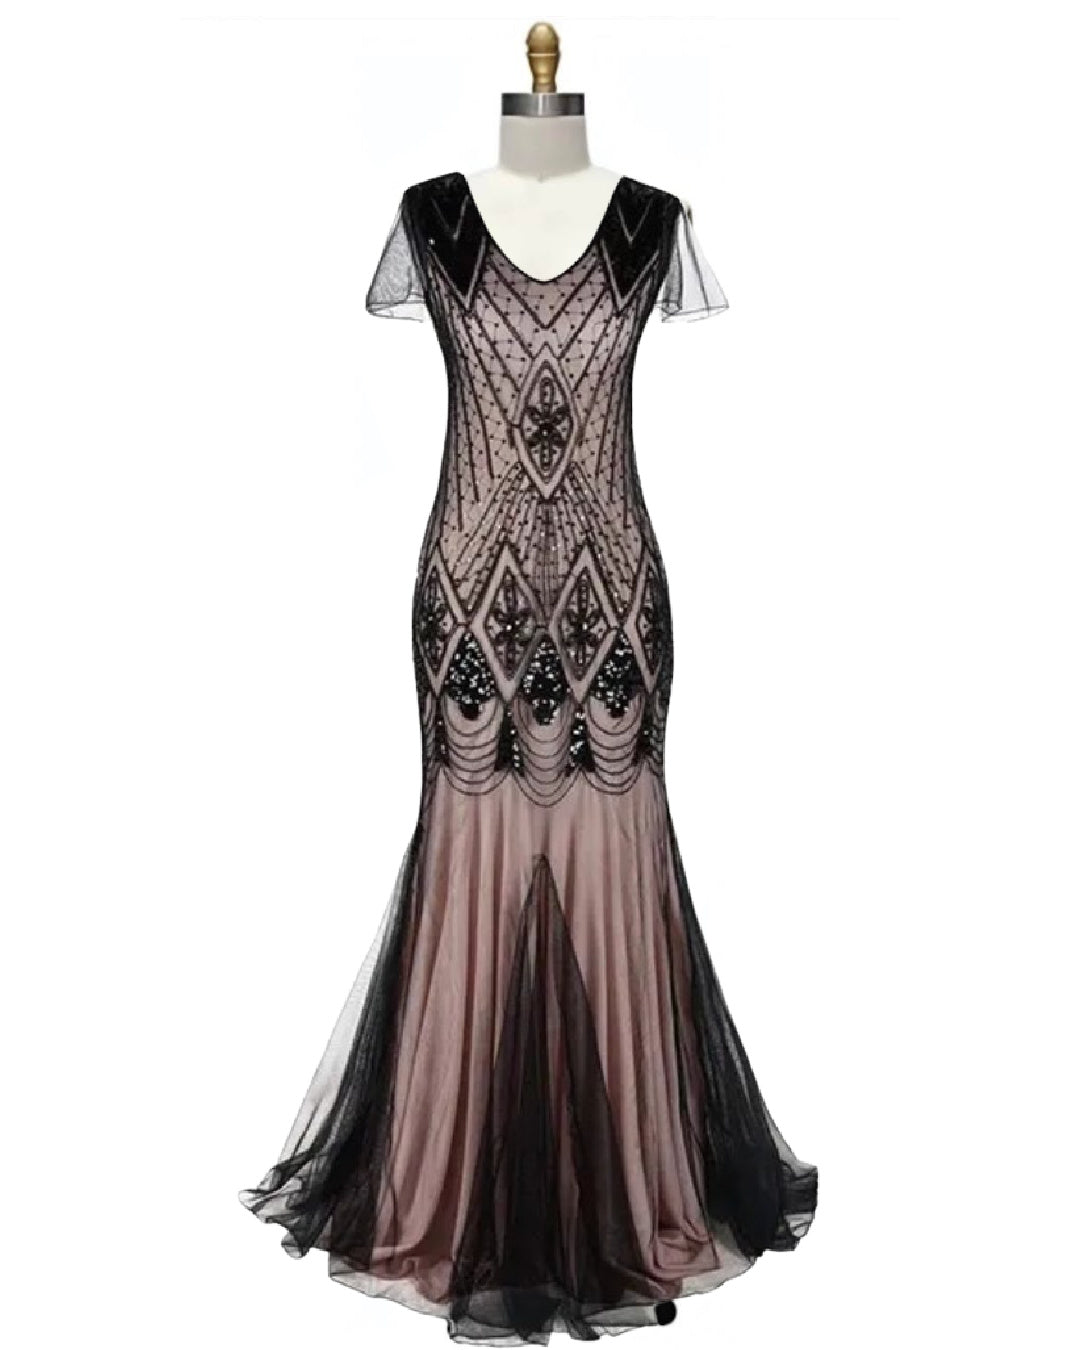 Cecily- the Floor Length 1920s Inspired Beaded Dress 8 Colors